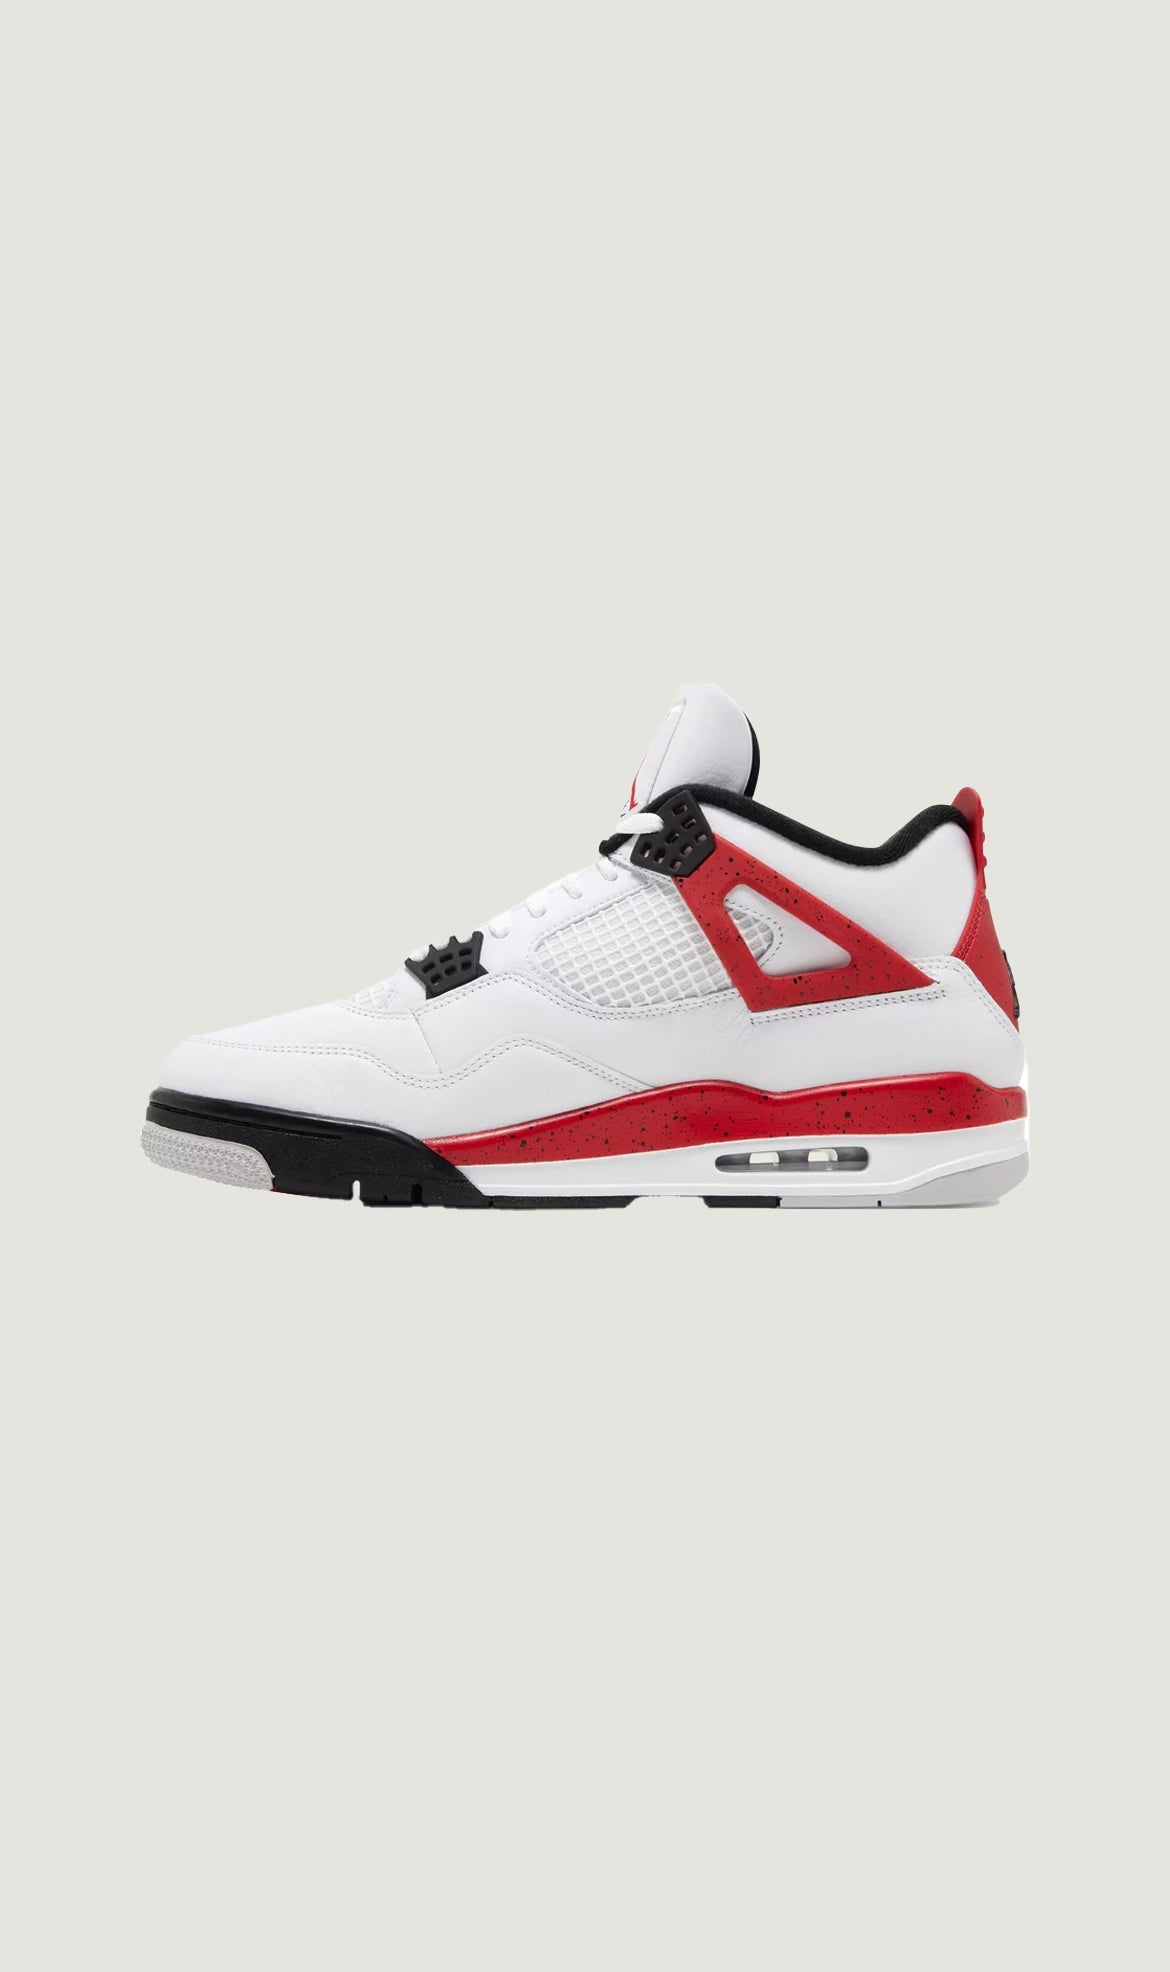 Load image into Gallery viewer, AIR JORDAN 4 RETRO - RED CEMENT
